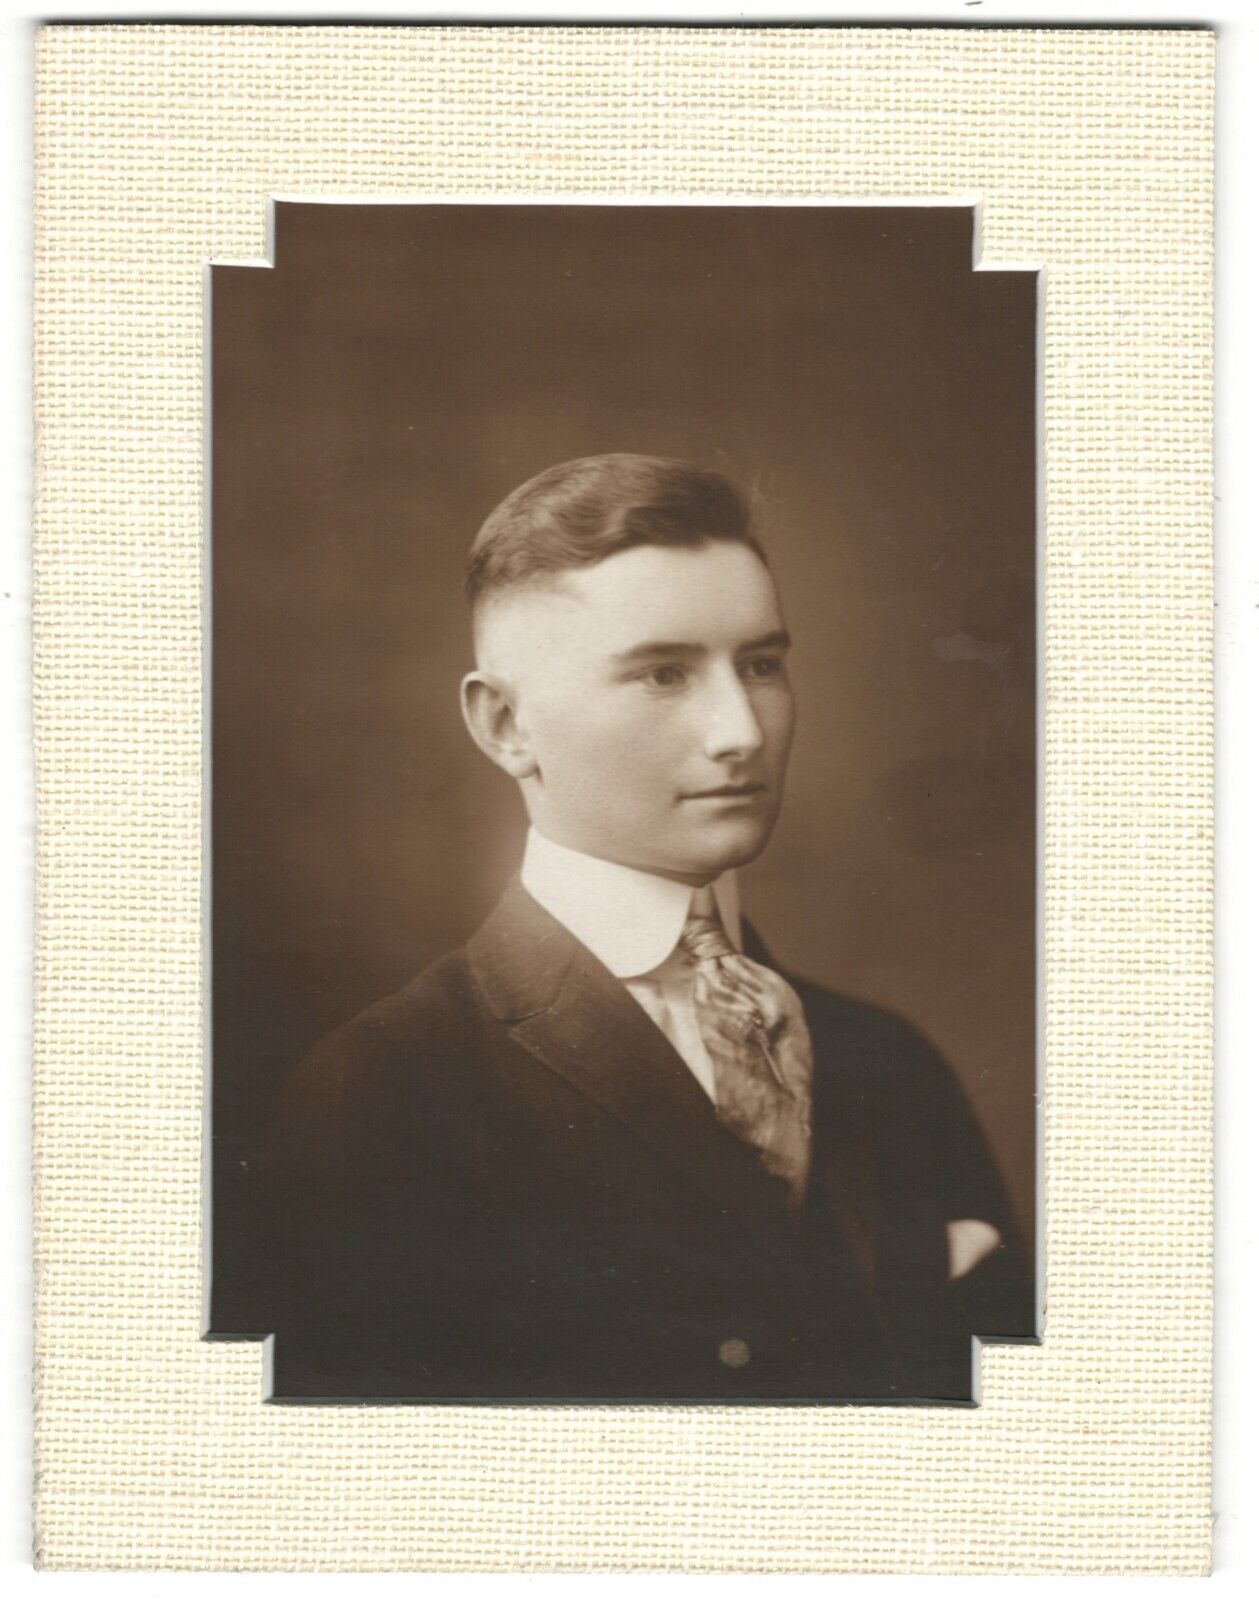 Portrait of Wealthy Young Man Early 1900s c.1925 3.5 x 5 inches Frame was added